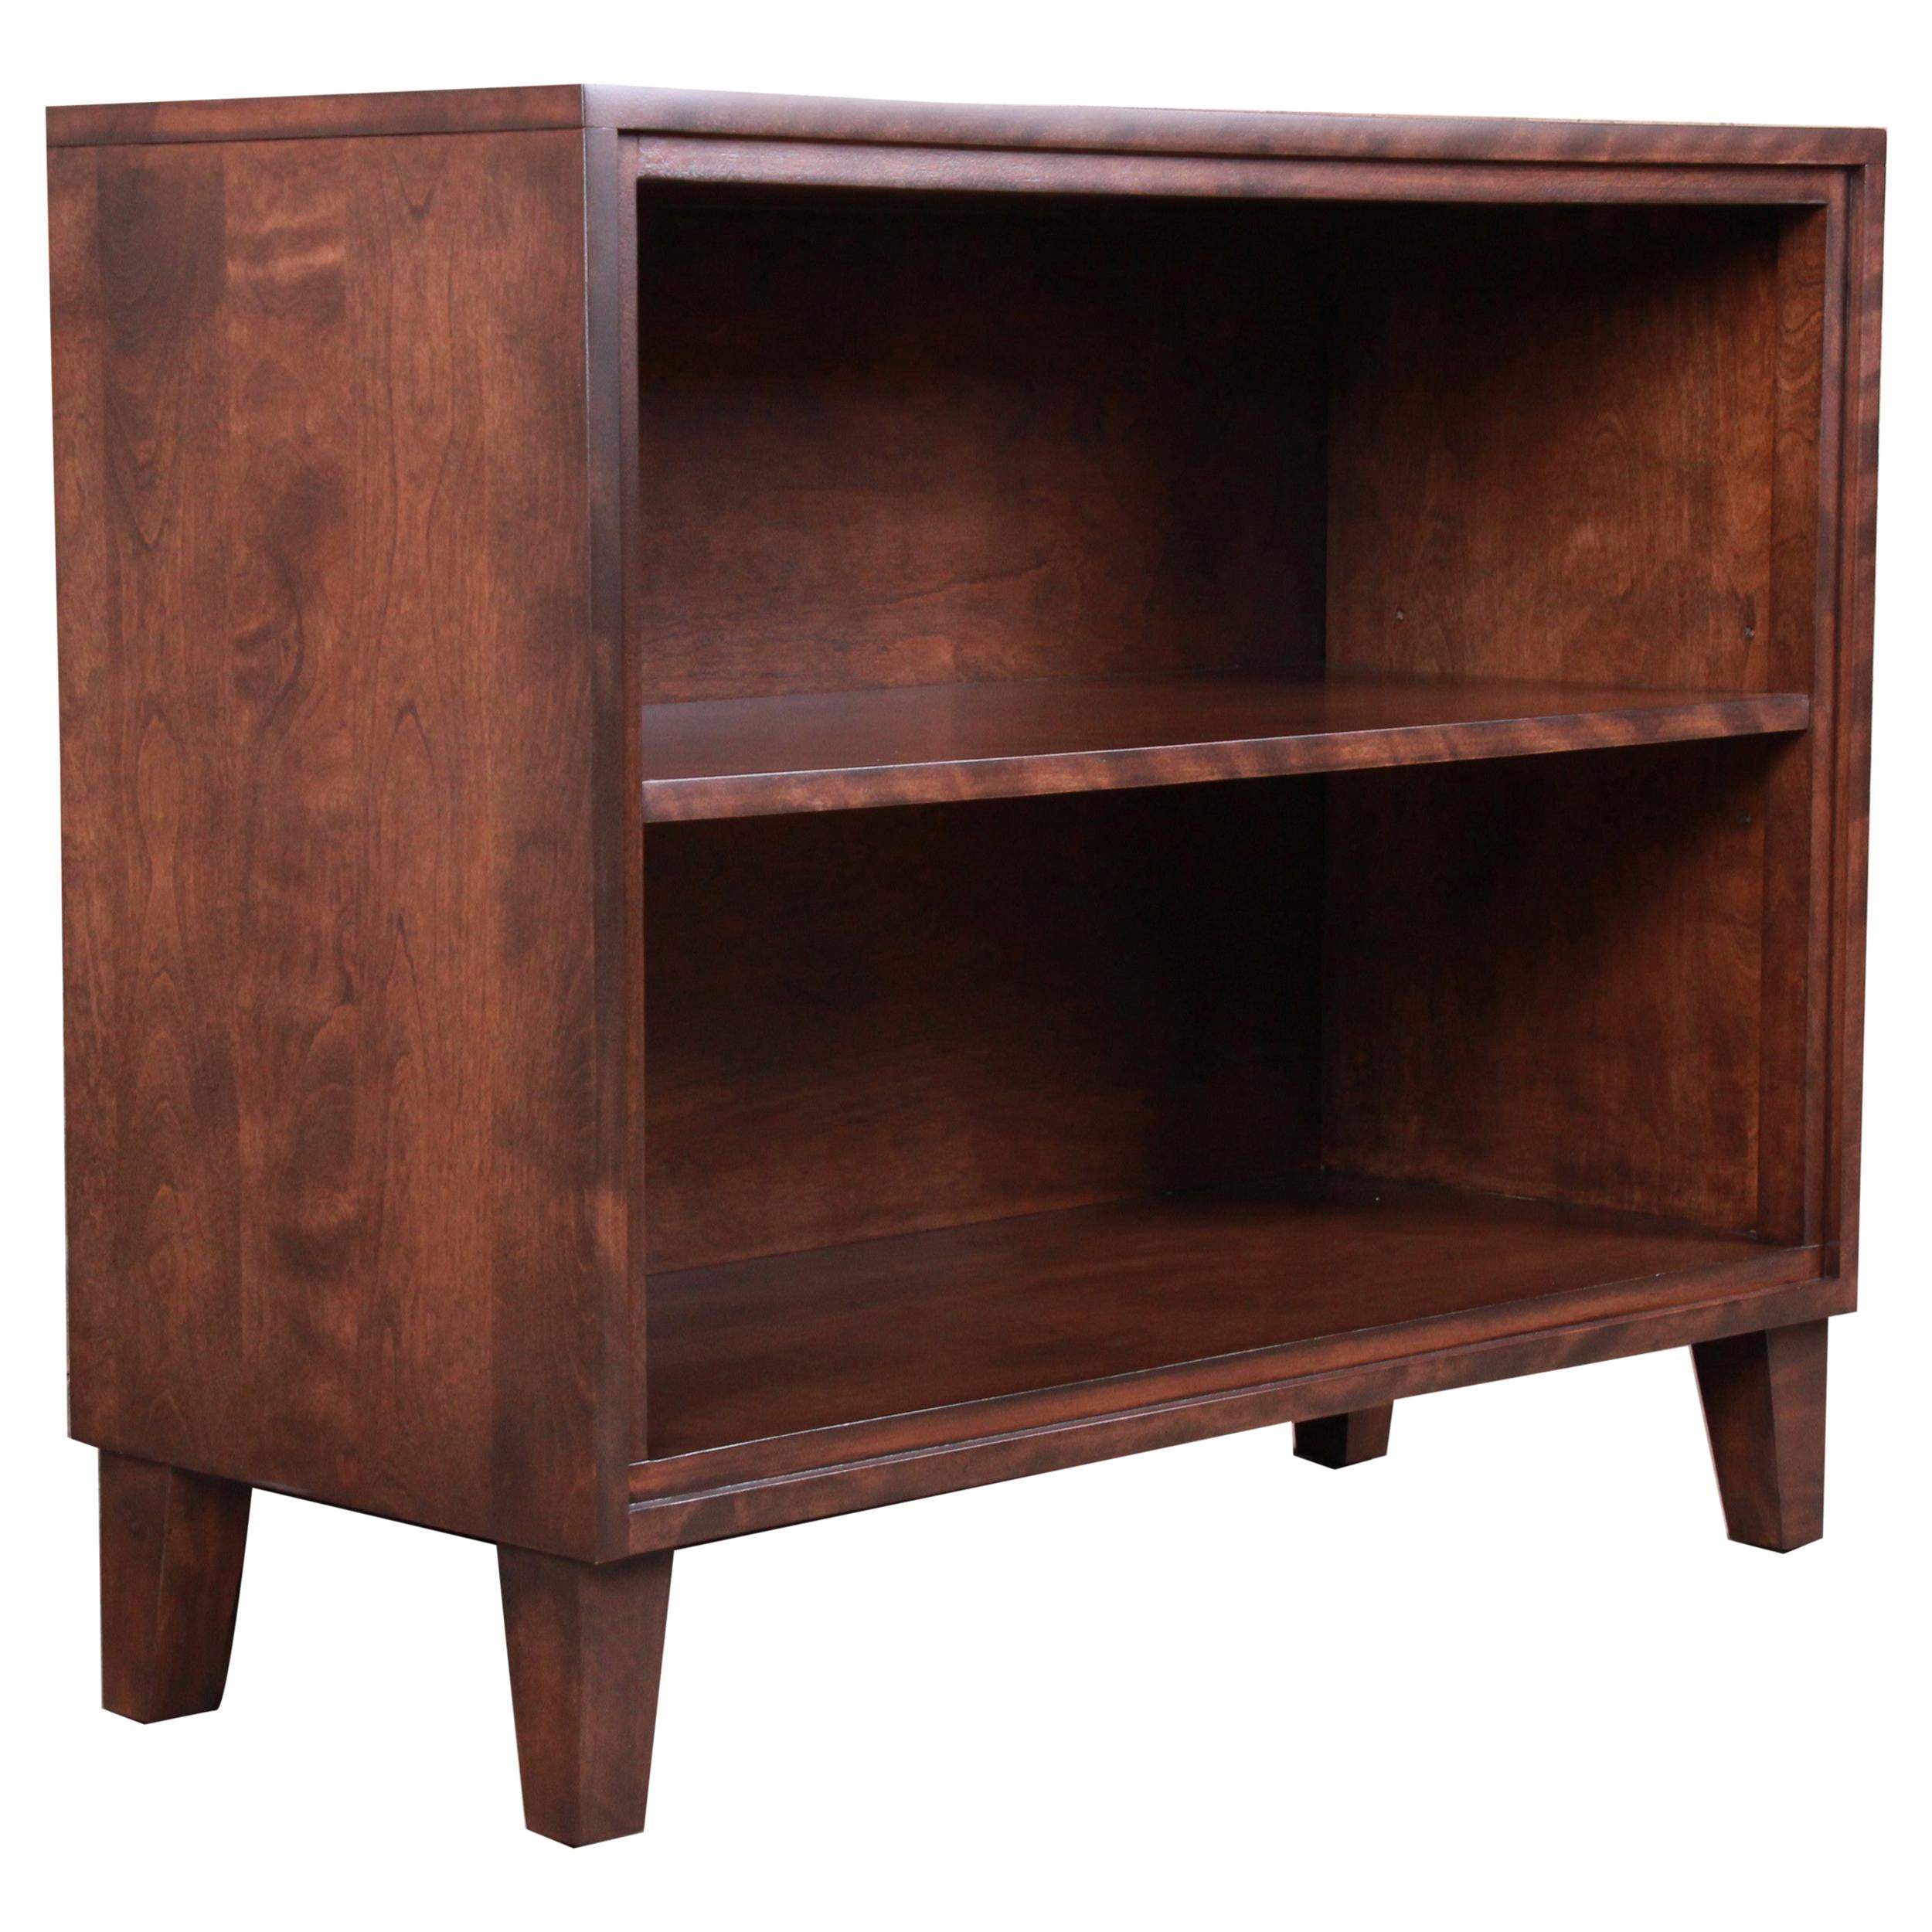 Leslie Diamond for Conant Ball Solid Birch Bookcase, Newly Refinished